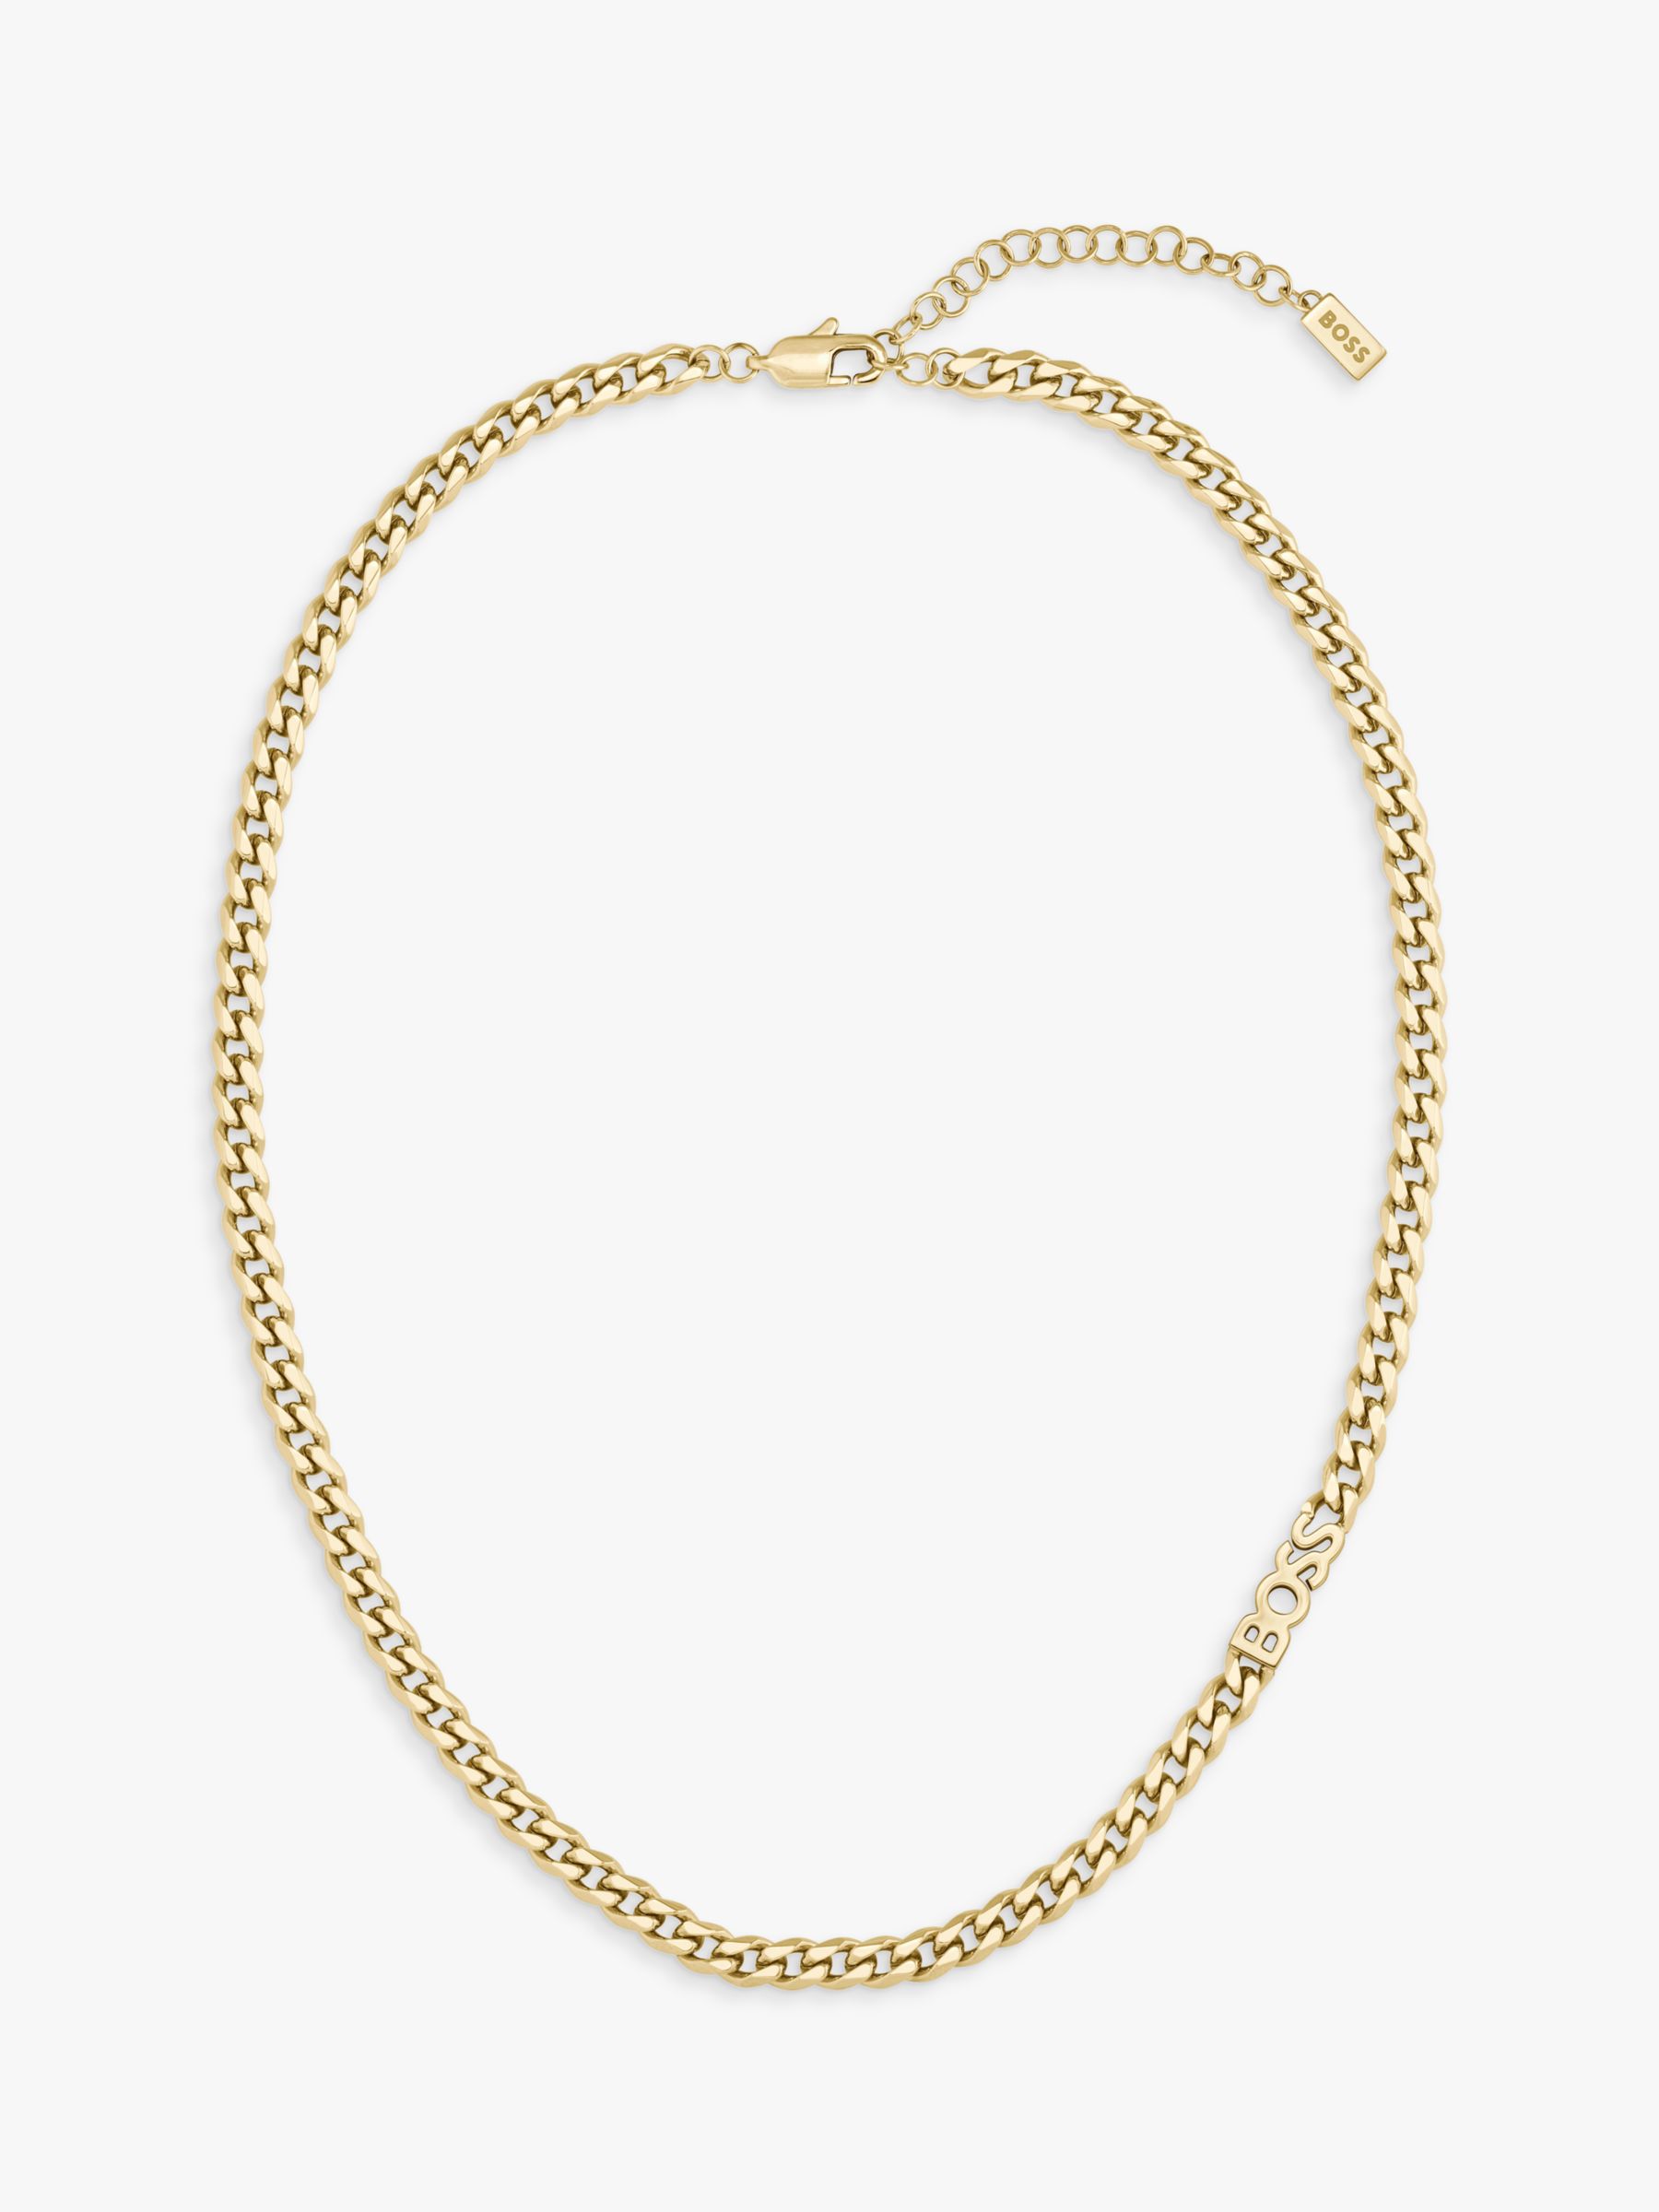 HUGO BOSS Kassy Curb Chain Necklace, Gold at John Lewis & Partners